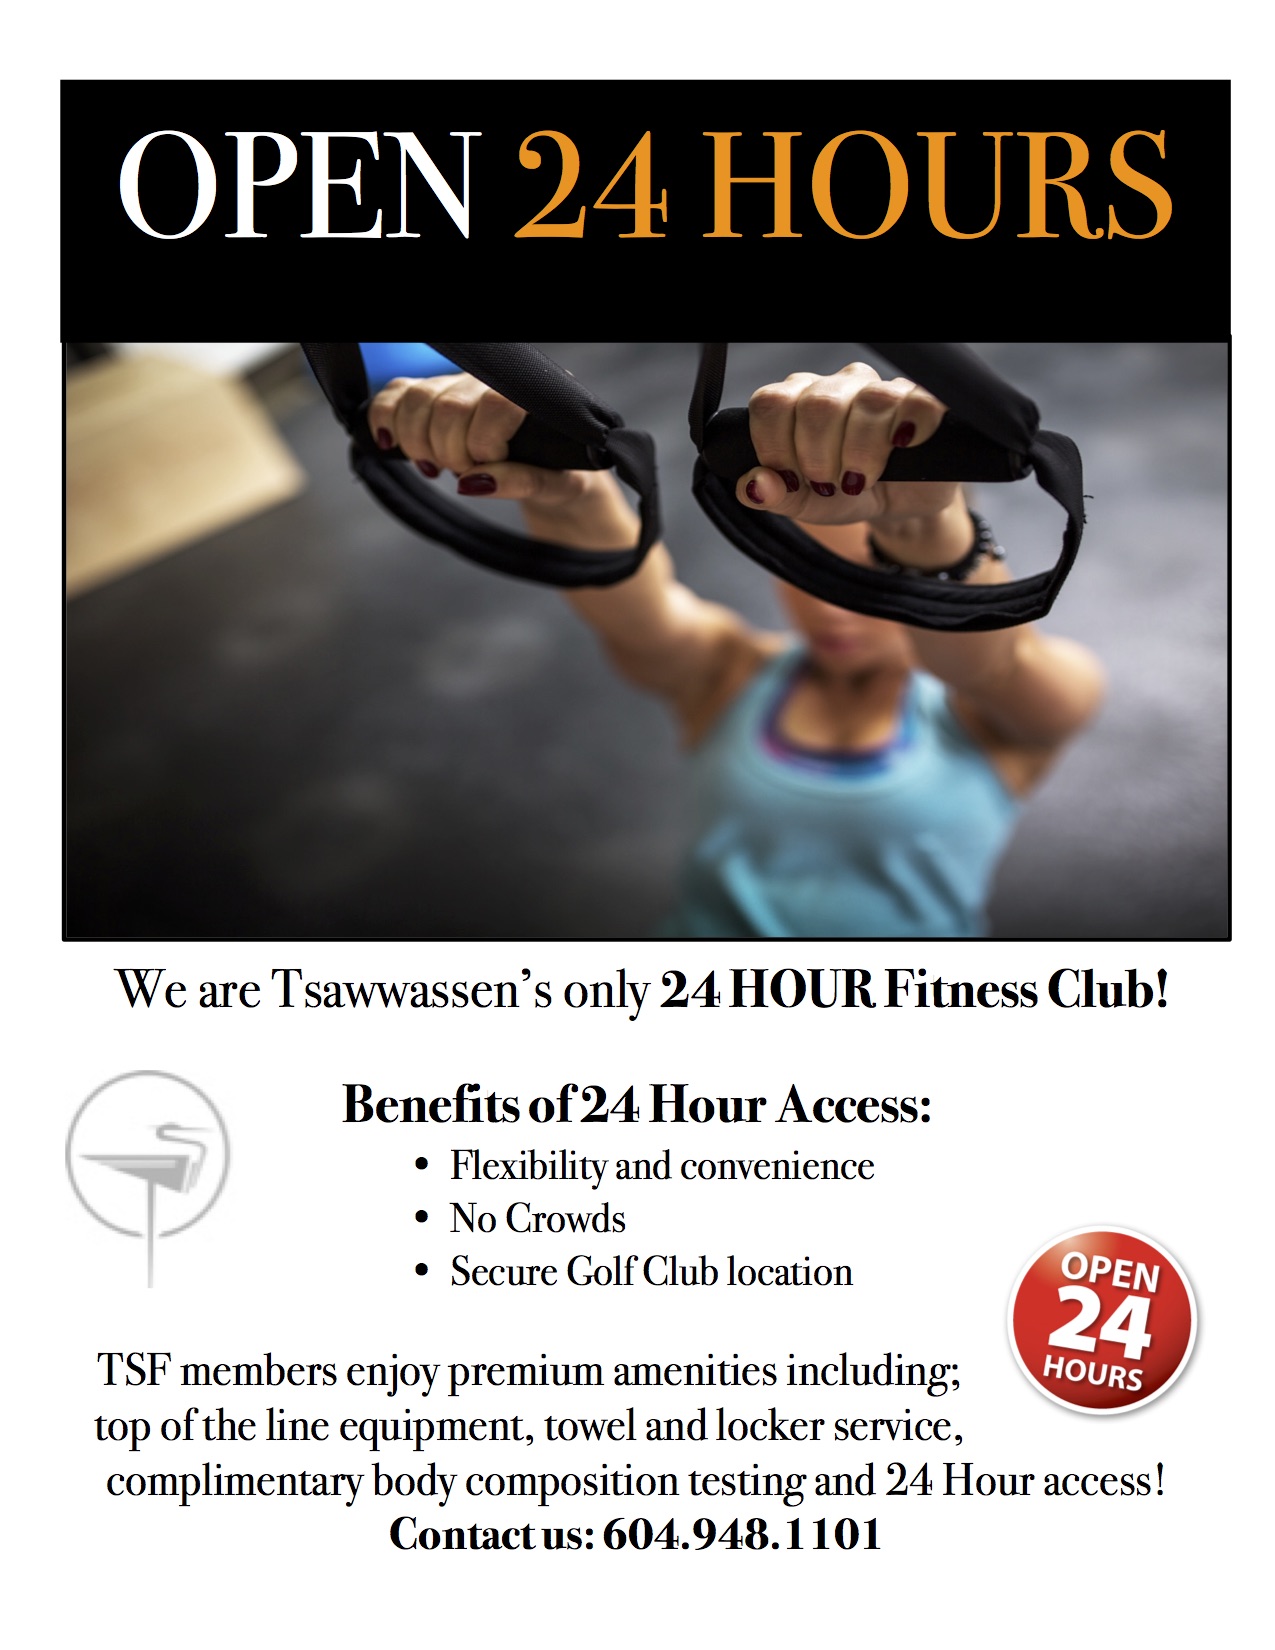 We are Tsawwassen’s only 24 HOUR Fitness Club